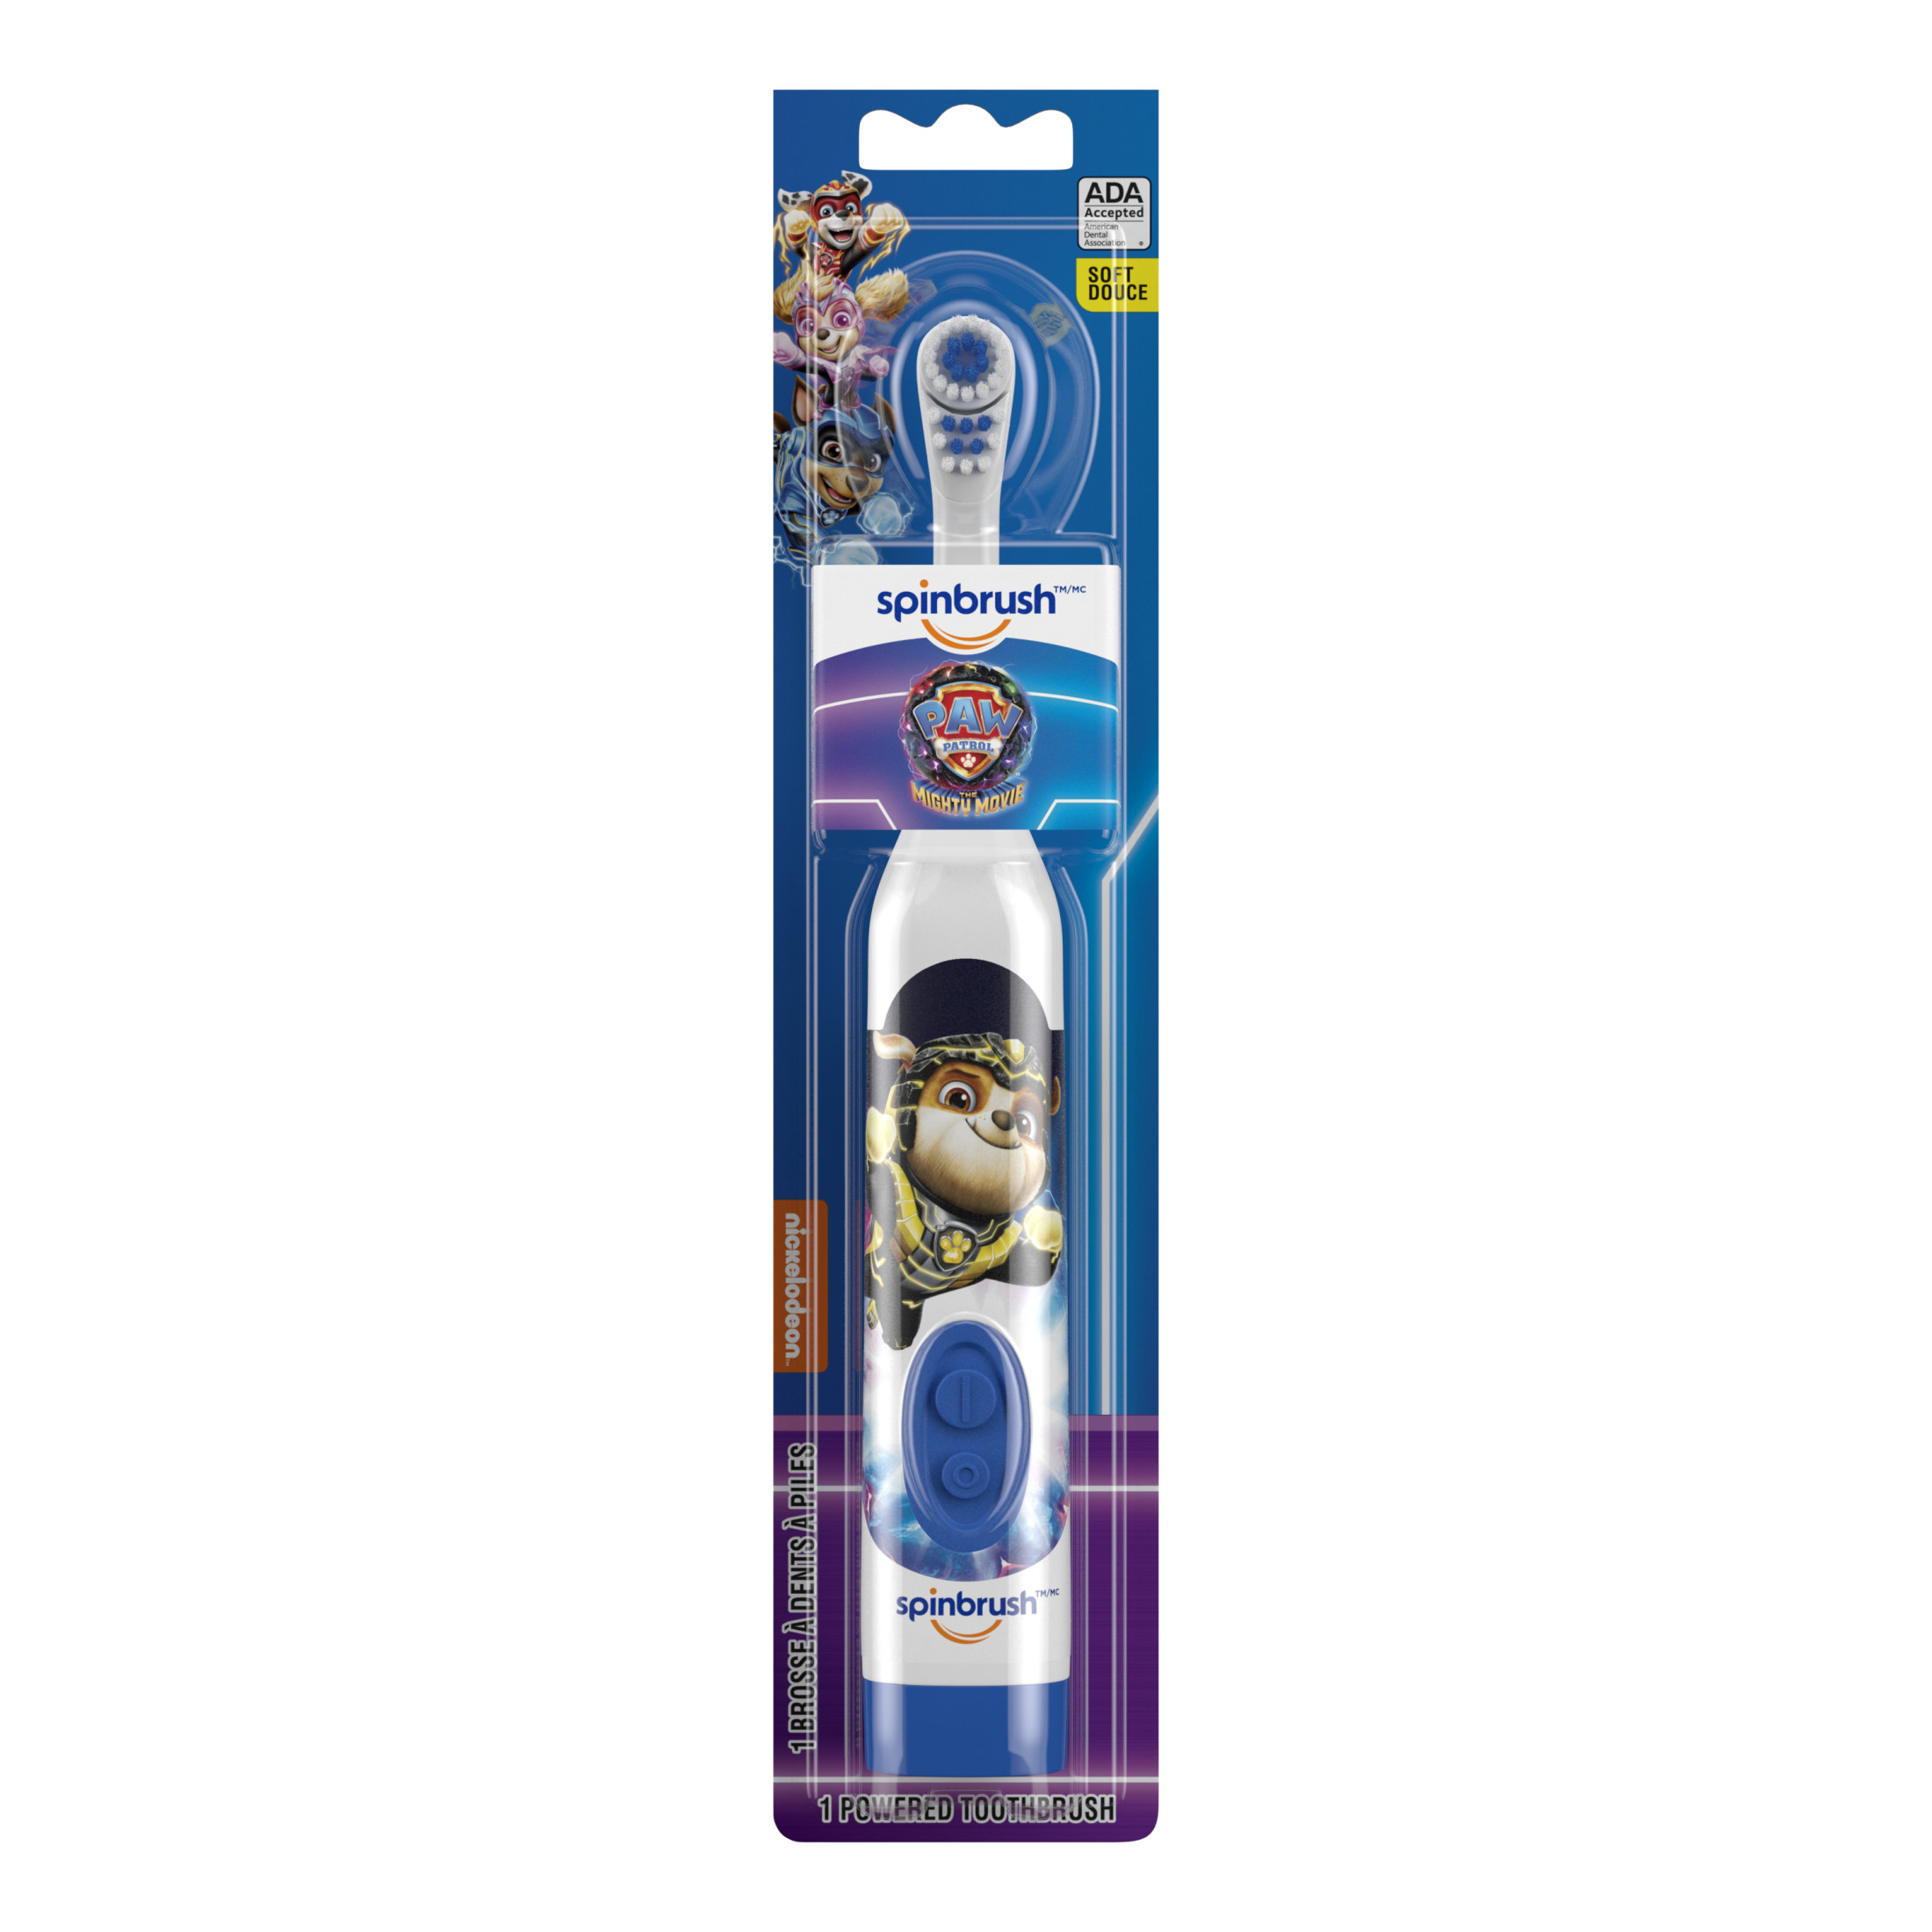 PAW Patrol Spinbrush Kids Battery-Powered Toothbrush, Soft Bristles, Ages 3+, Character May Vary - image 3 of 8